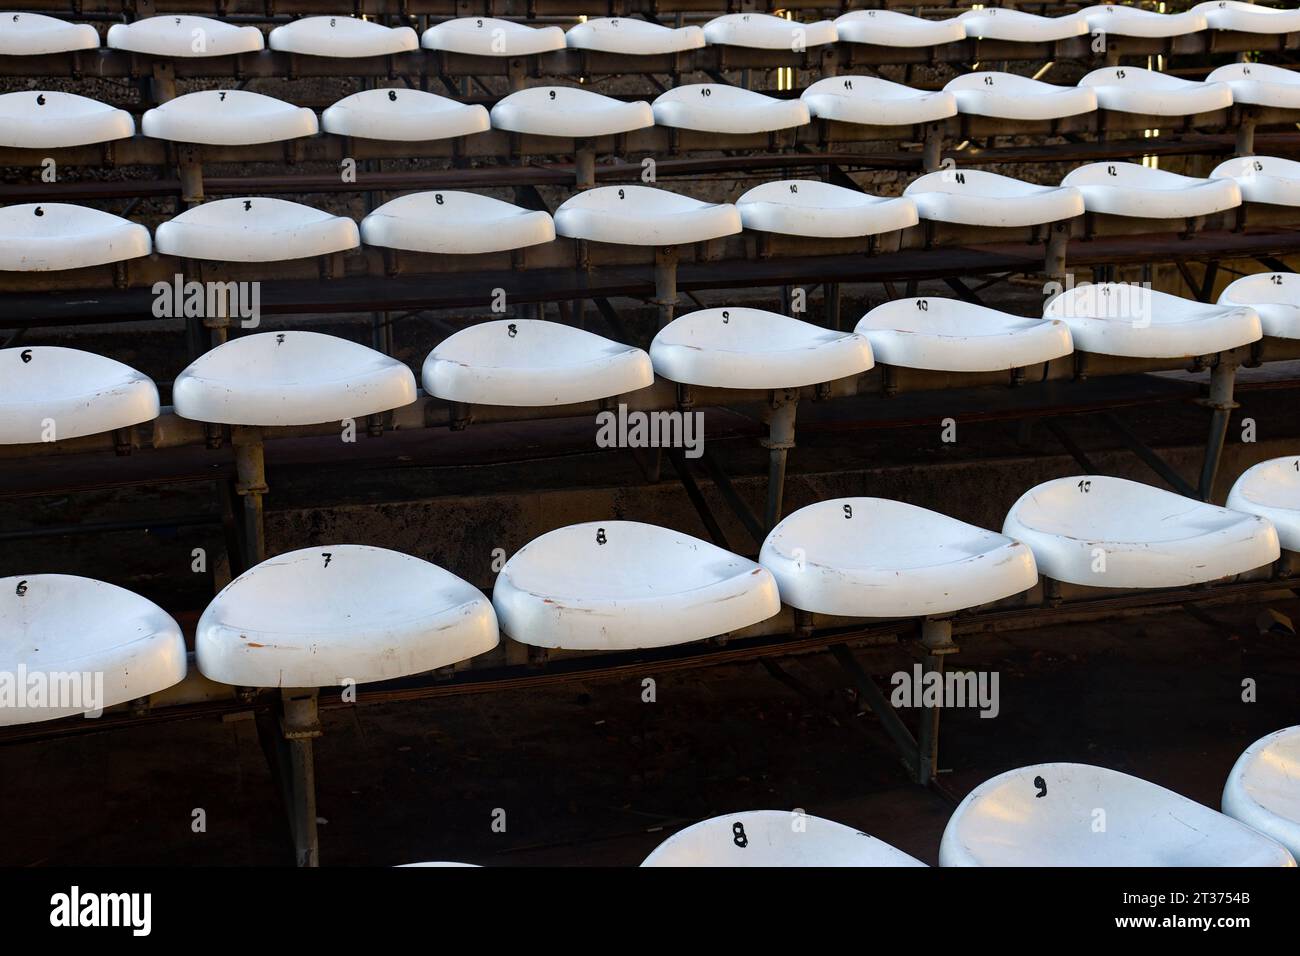 Multiple rows of white outdoor amphitheater seats for open-air ceremonies close-up Stock Photo